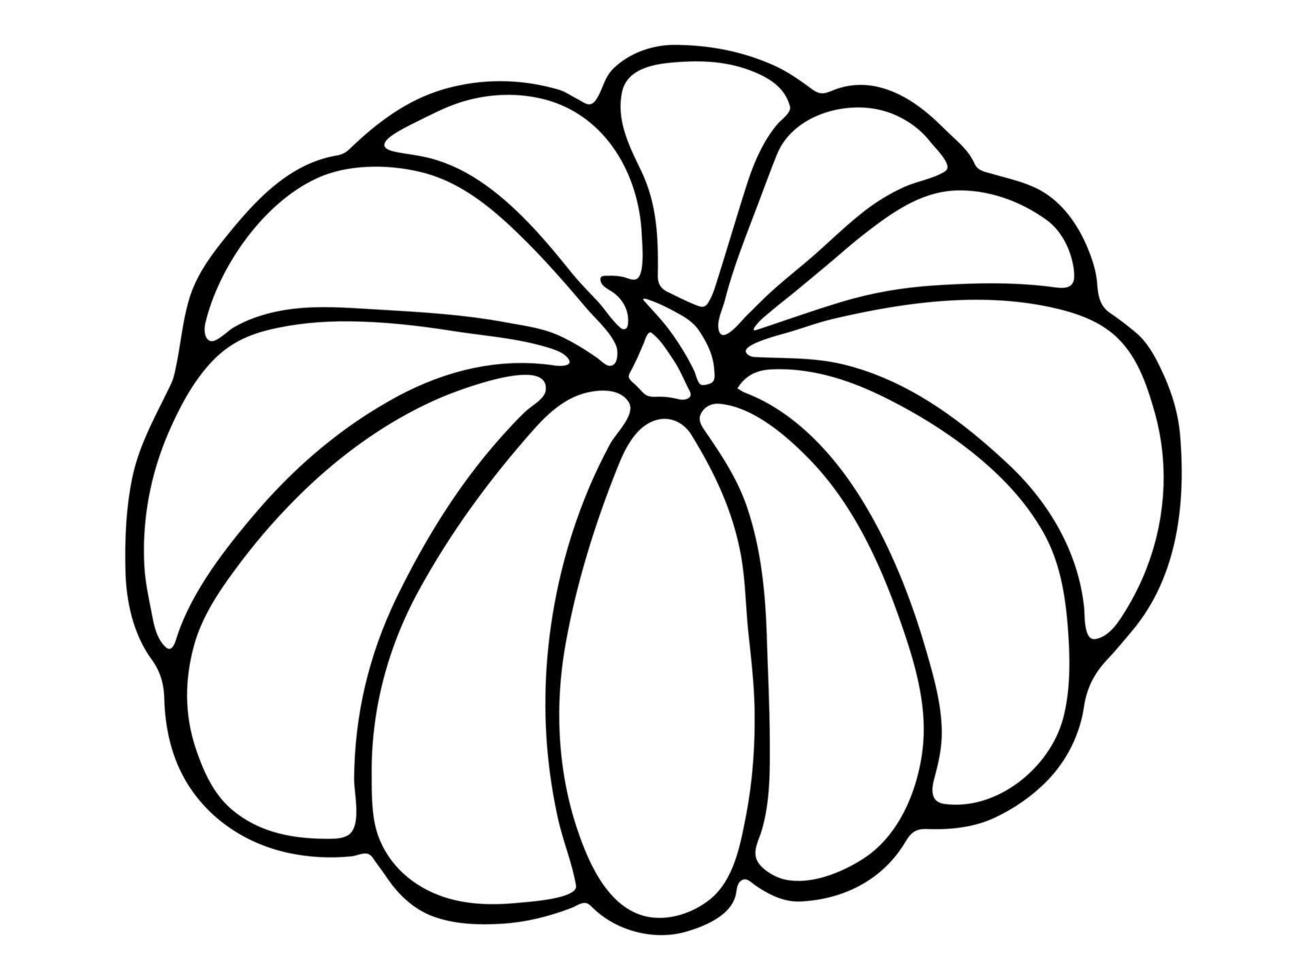 Vector hand drawn illustration of pumpkin. Isolated object on white background. Vegetable harvest clipart. Farm market product. Elements for autumn design, decoration.